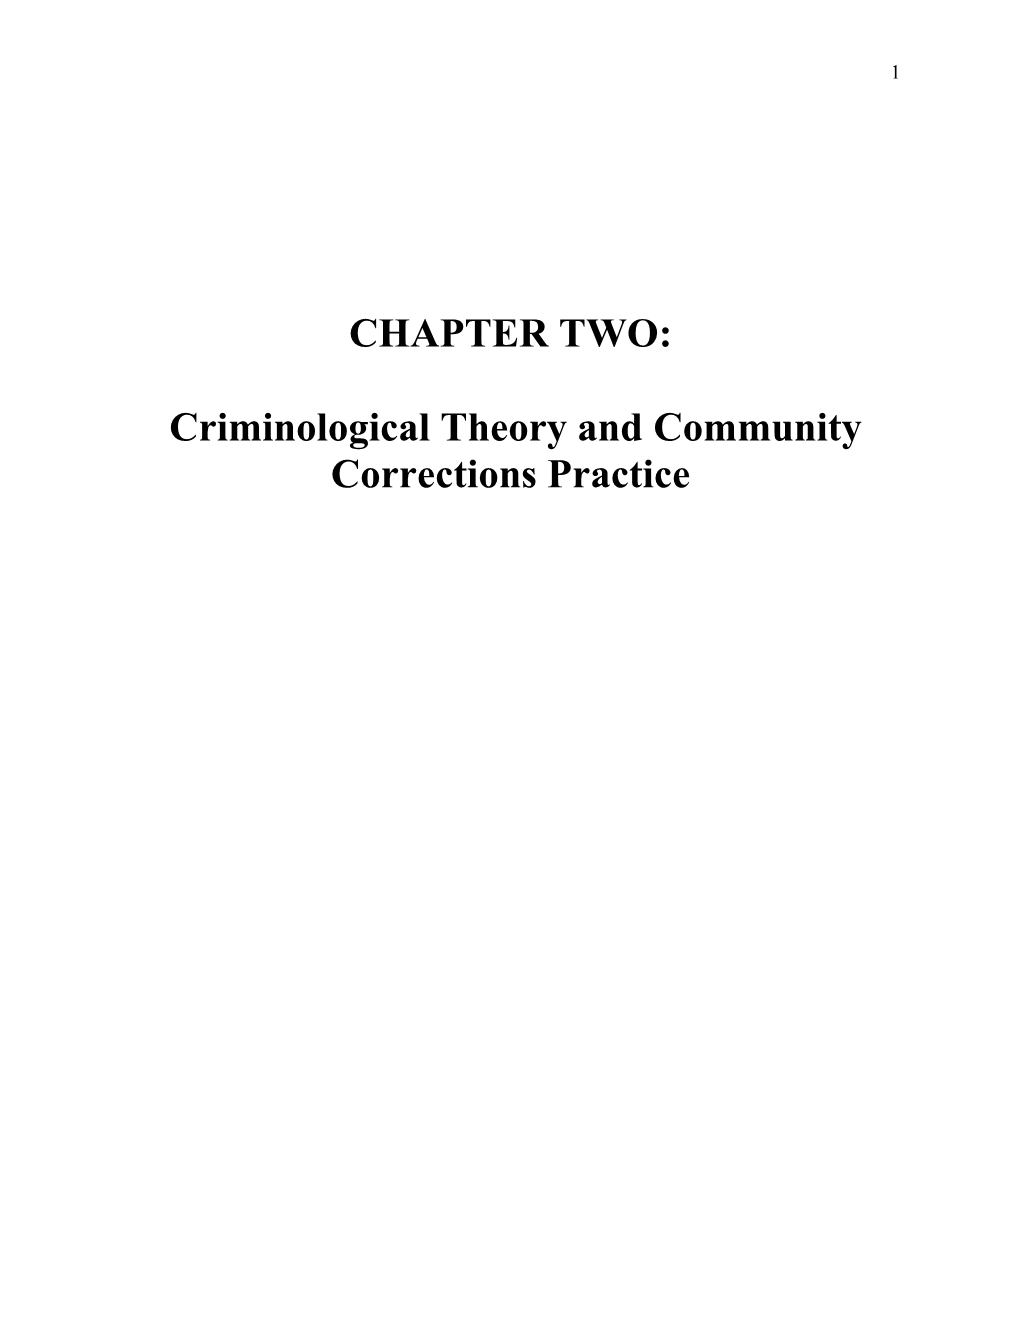 Chapter Two: Criminological Theory and Community Corrections Practice